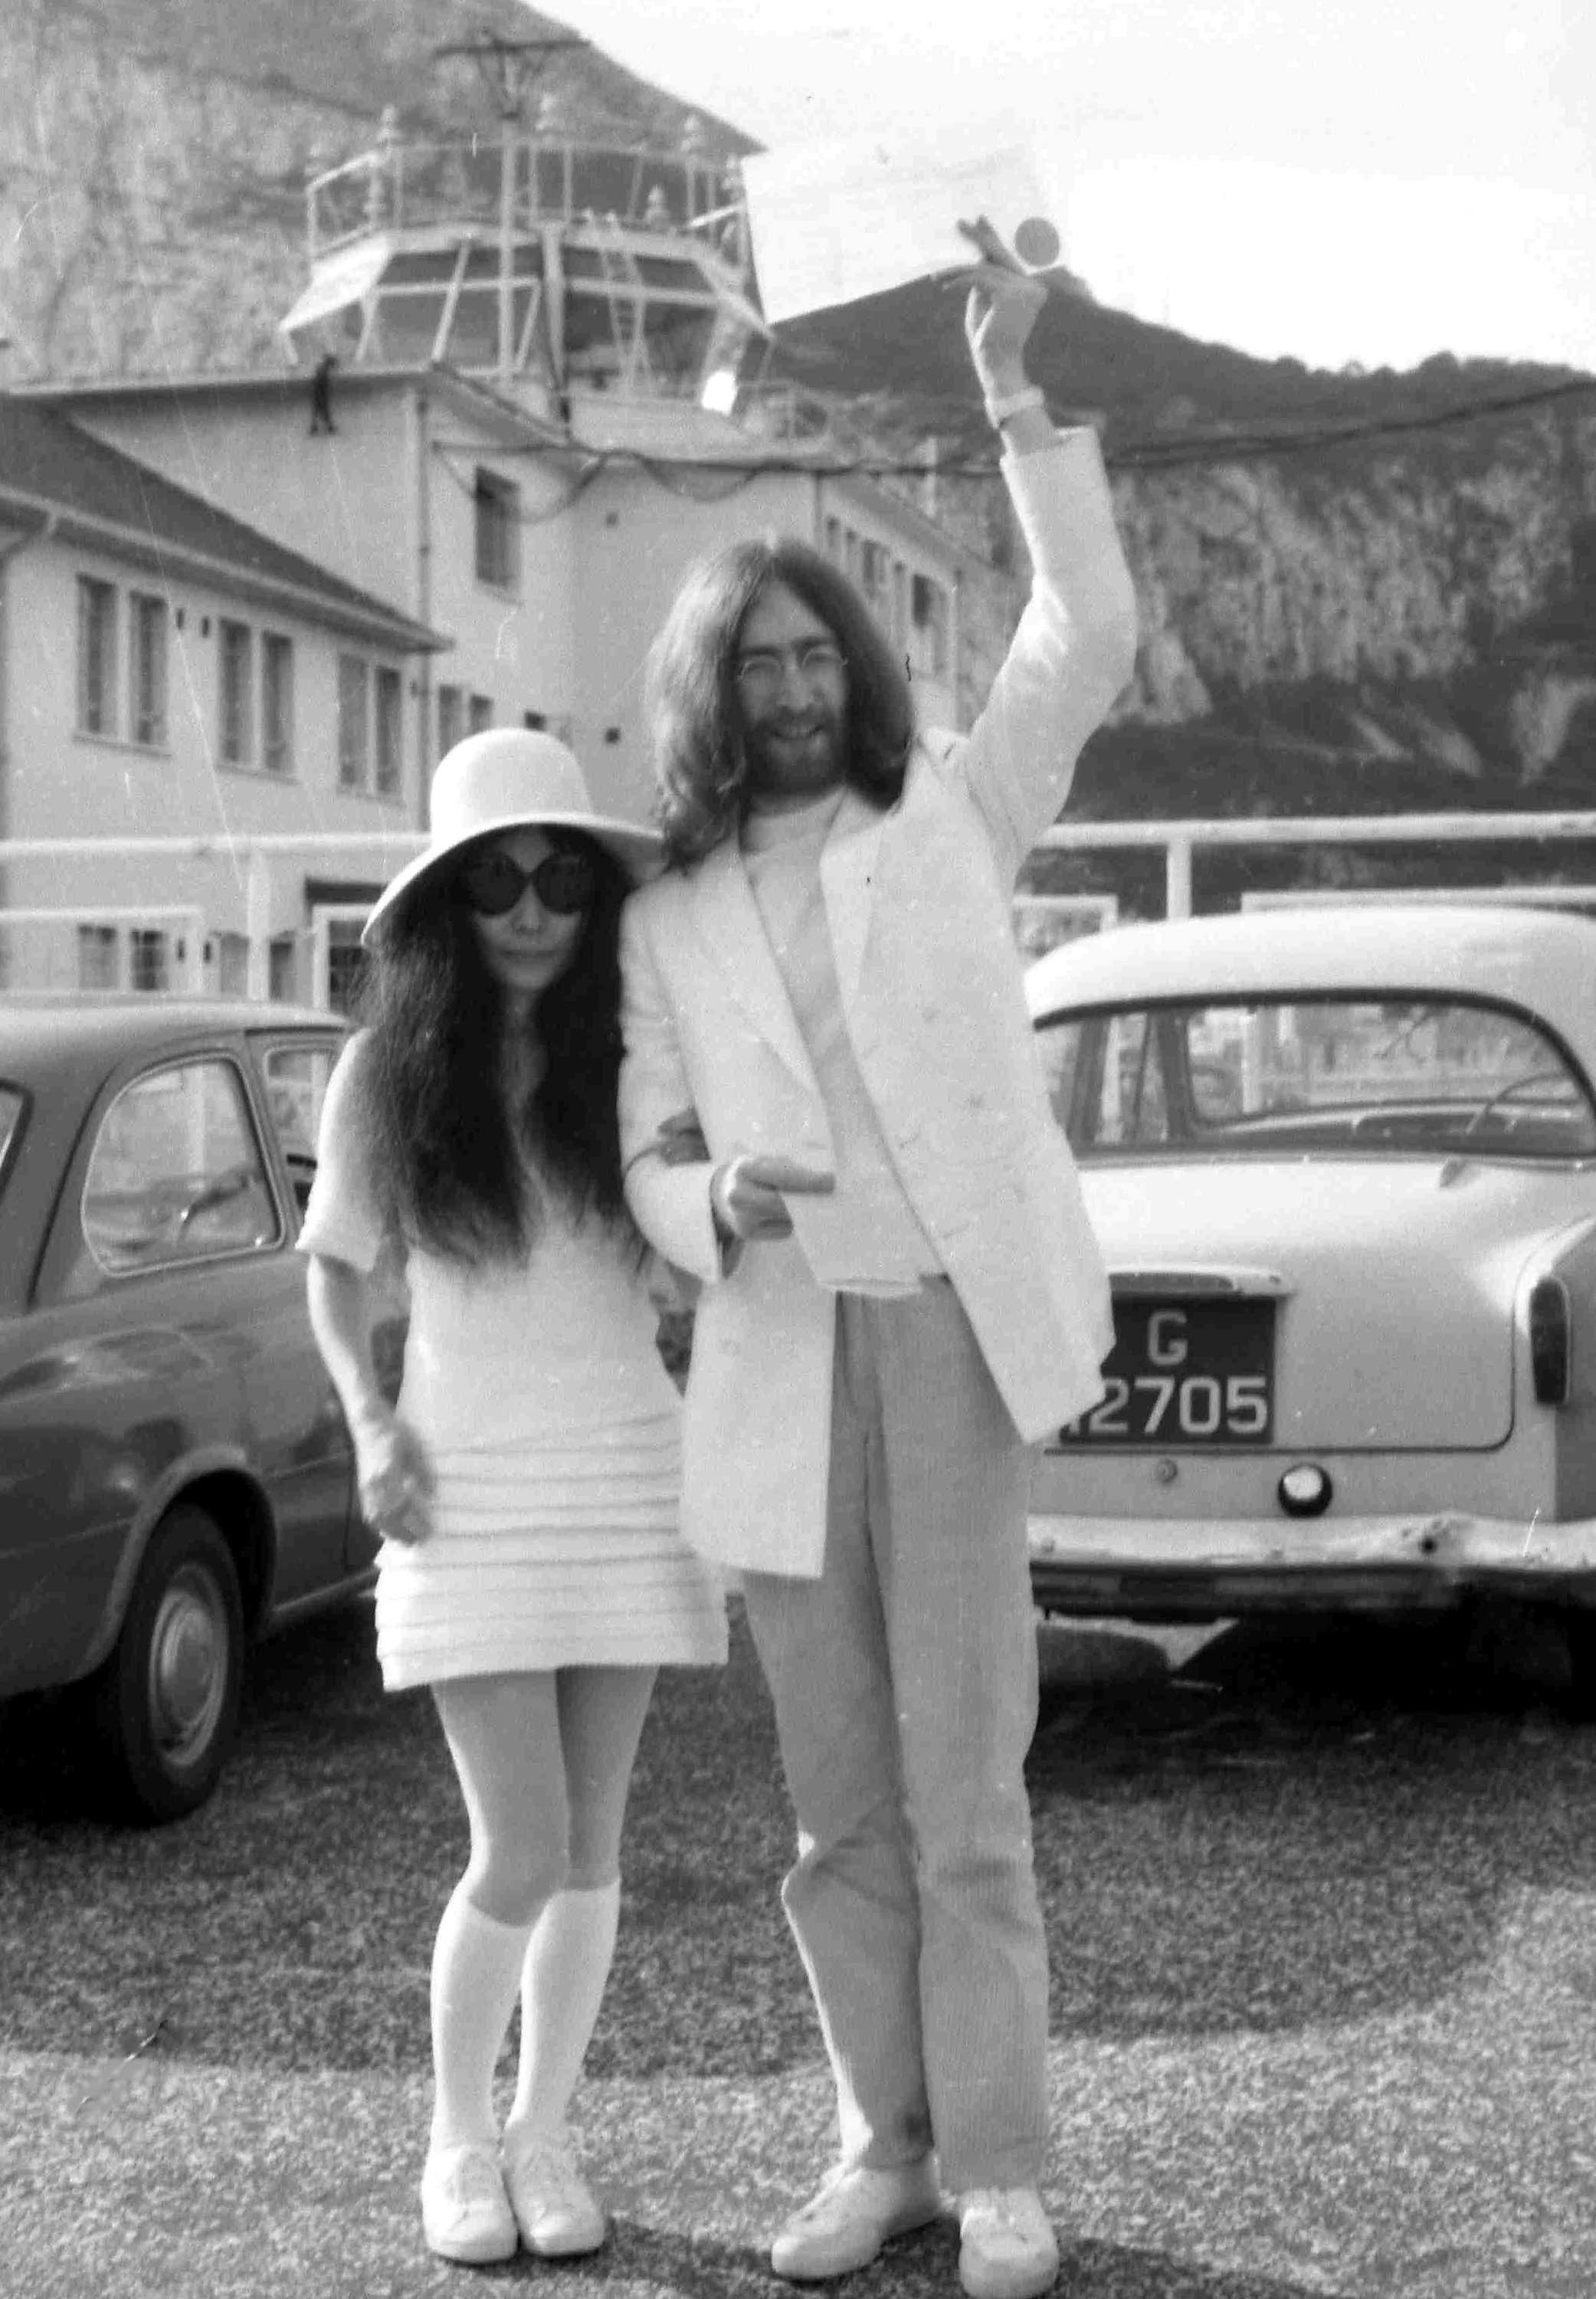 John Lennon and Yoko Ono  at their wedding in a parking lot with two cars behind them